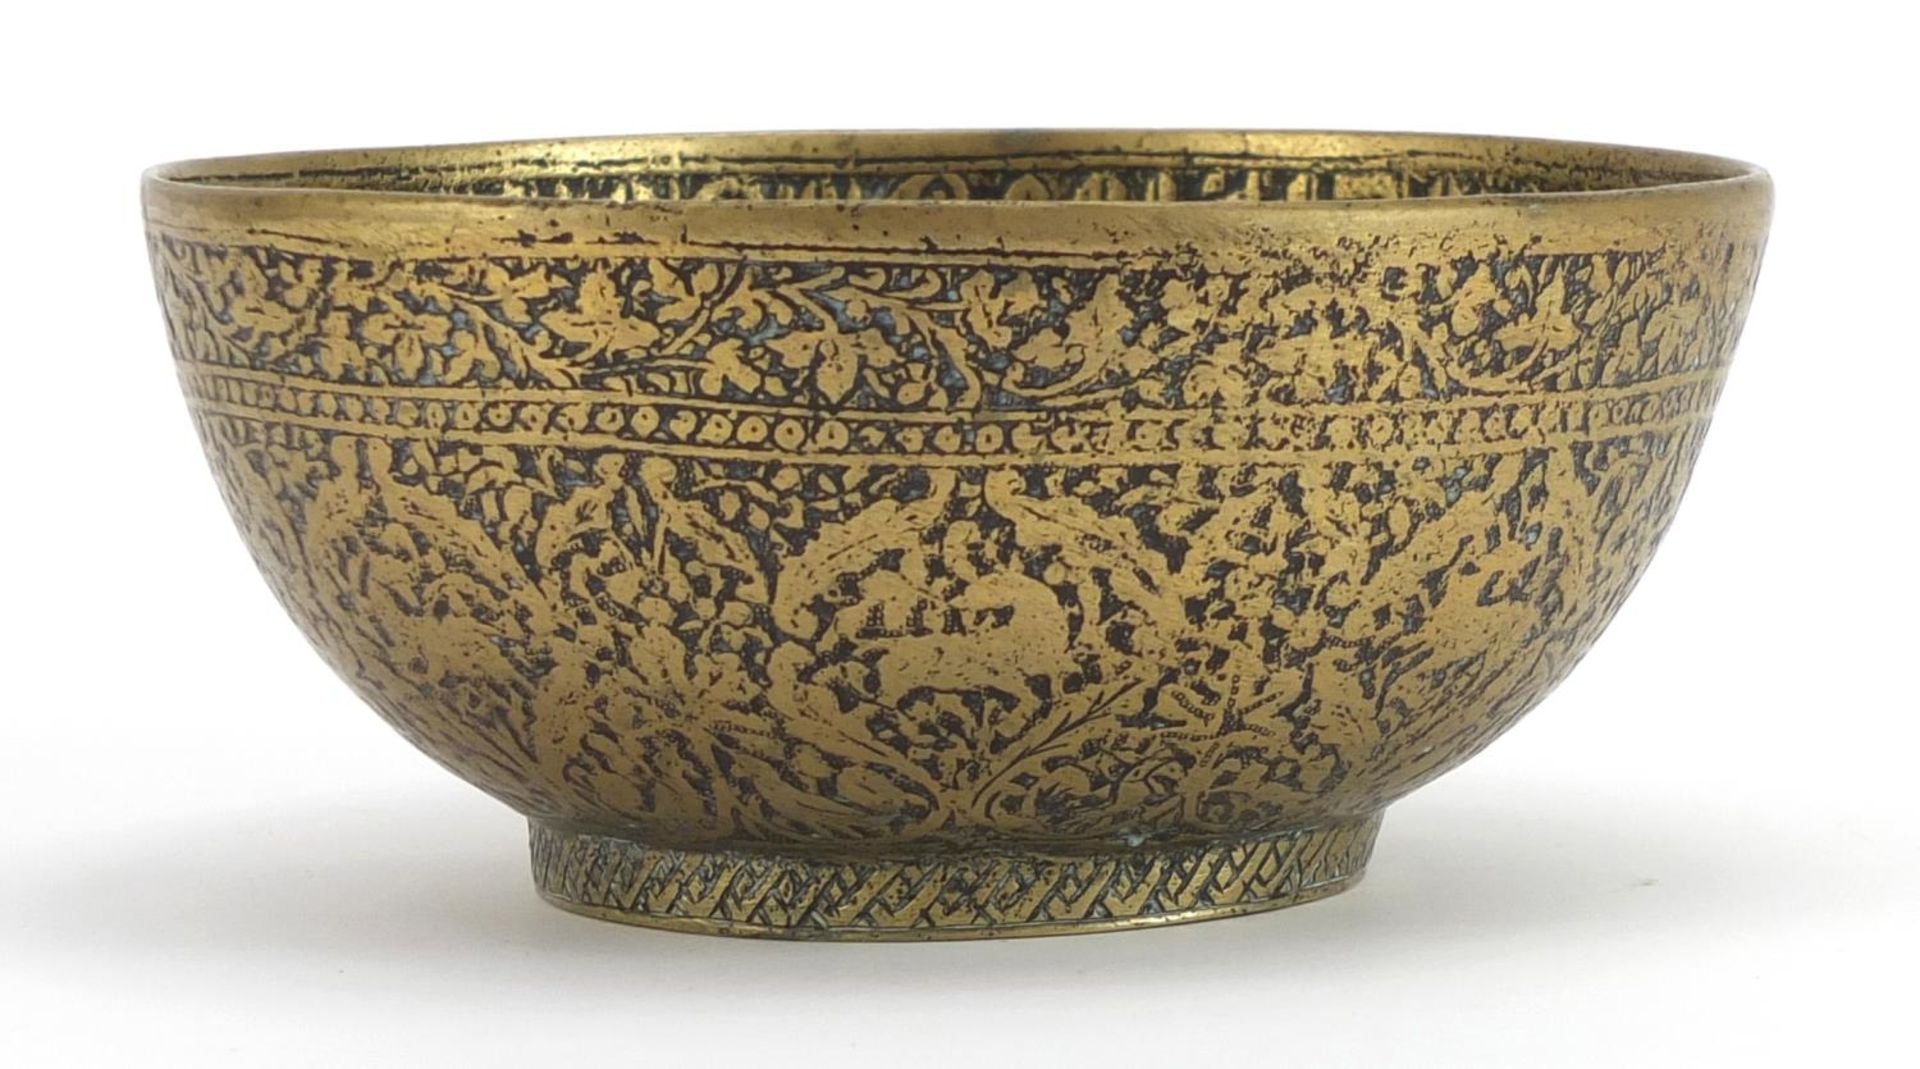 Islamic brass bowl engraved with wild animals and calligraphy, 14cm in diameter